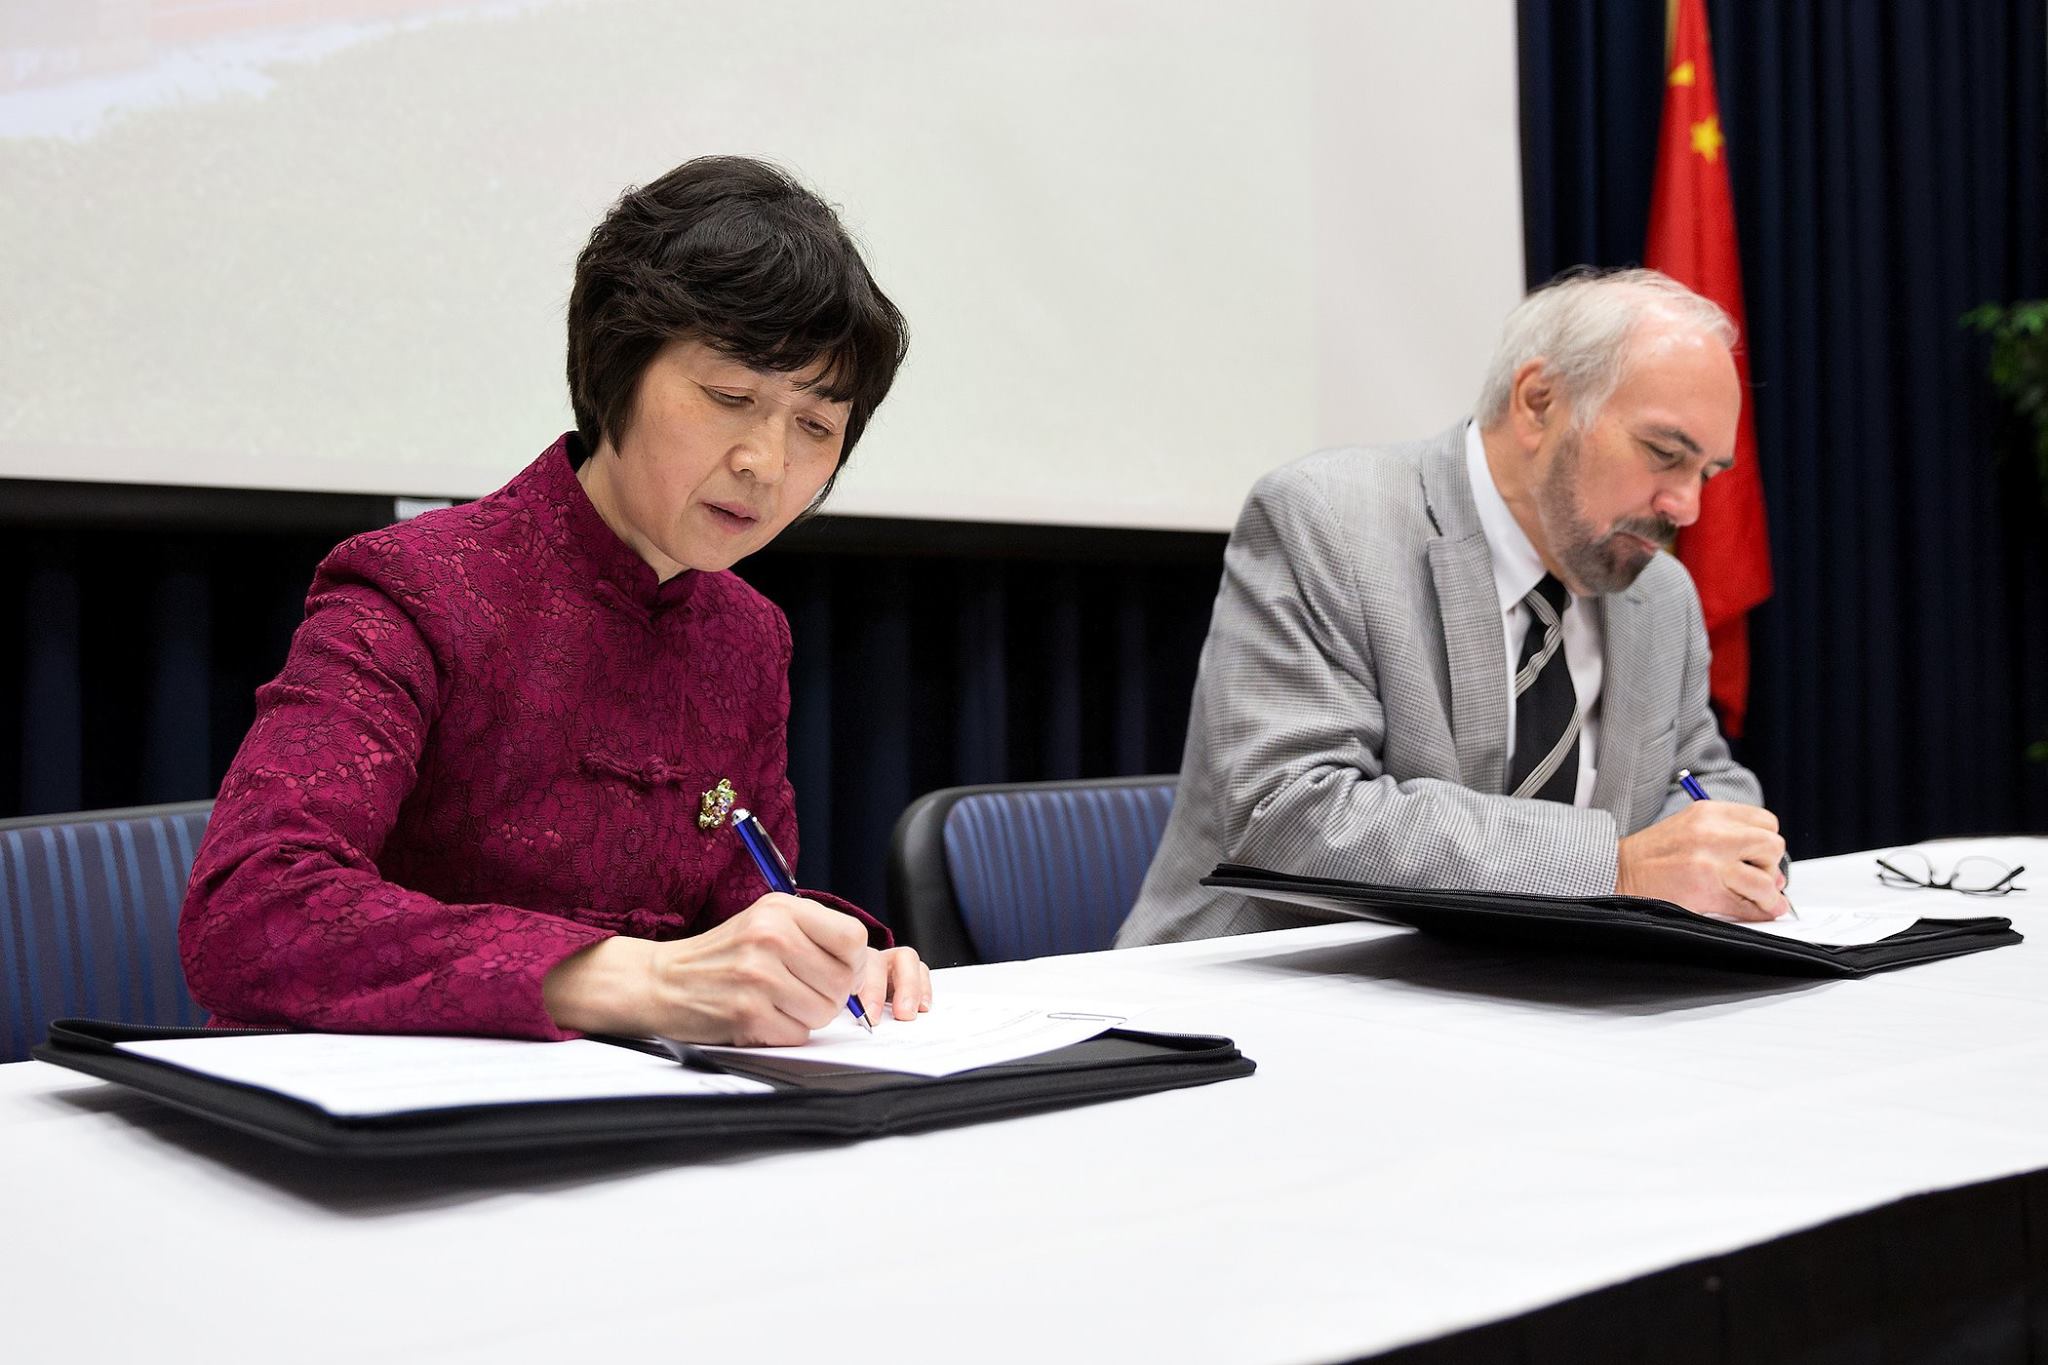 UTRGV hosts an Agreement signing ceremony with Hunan First Normal University.